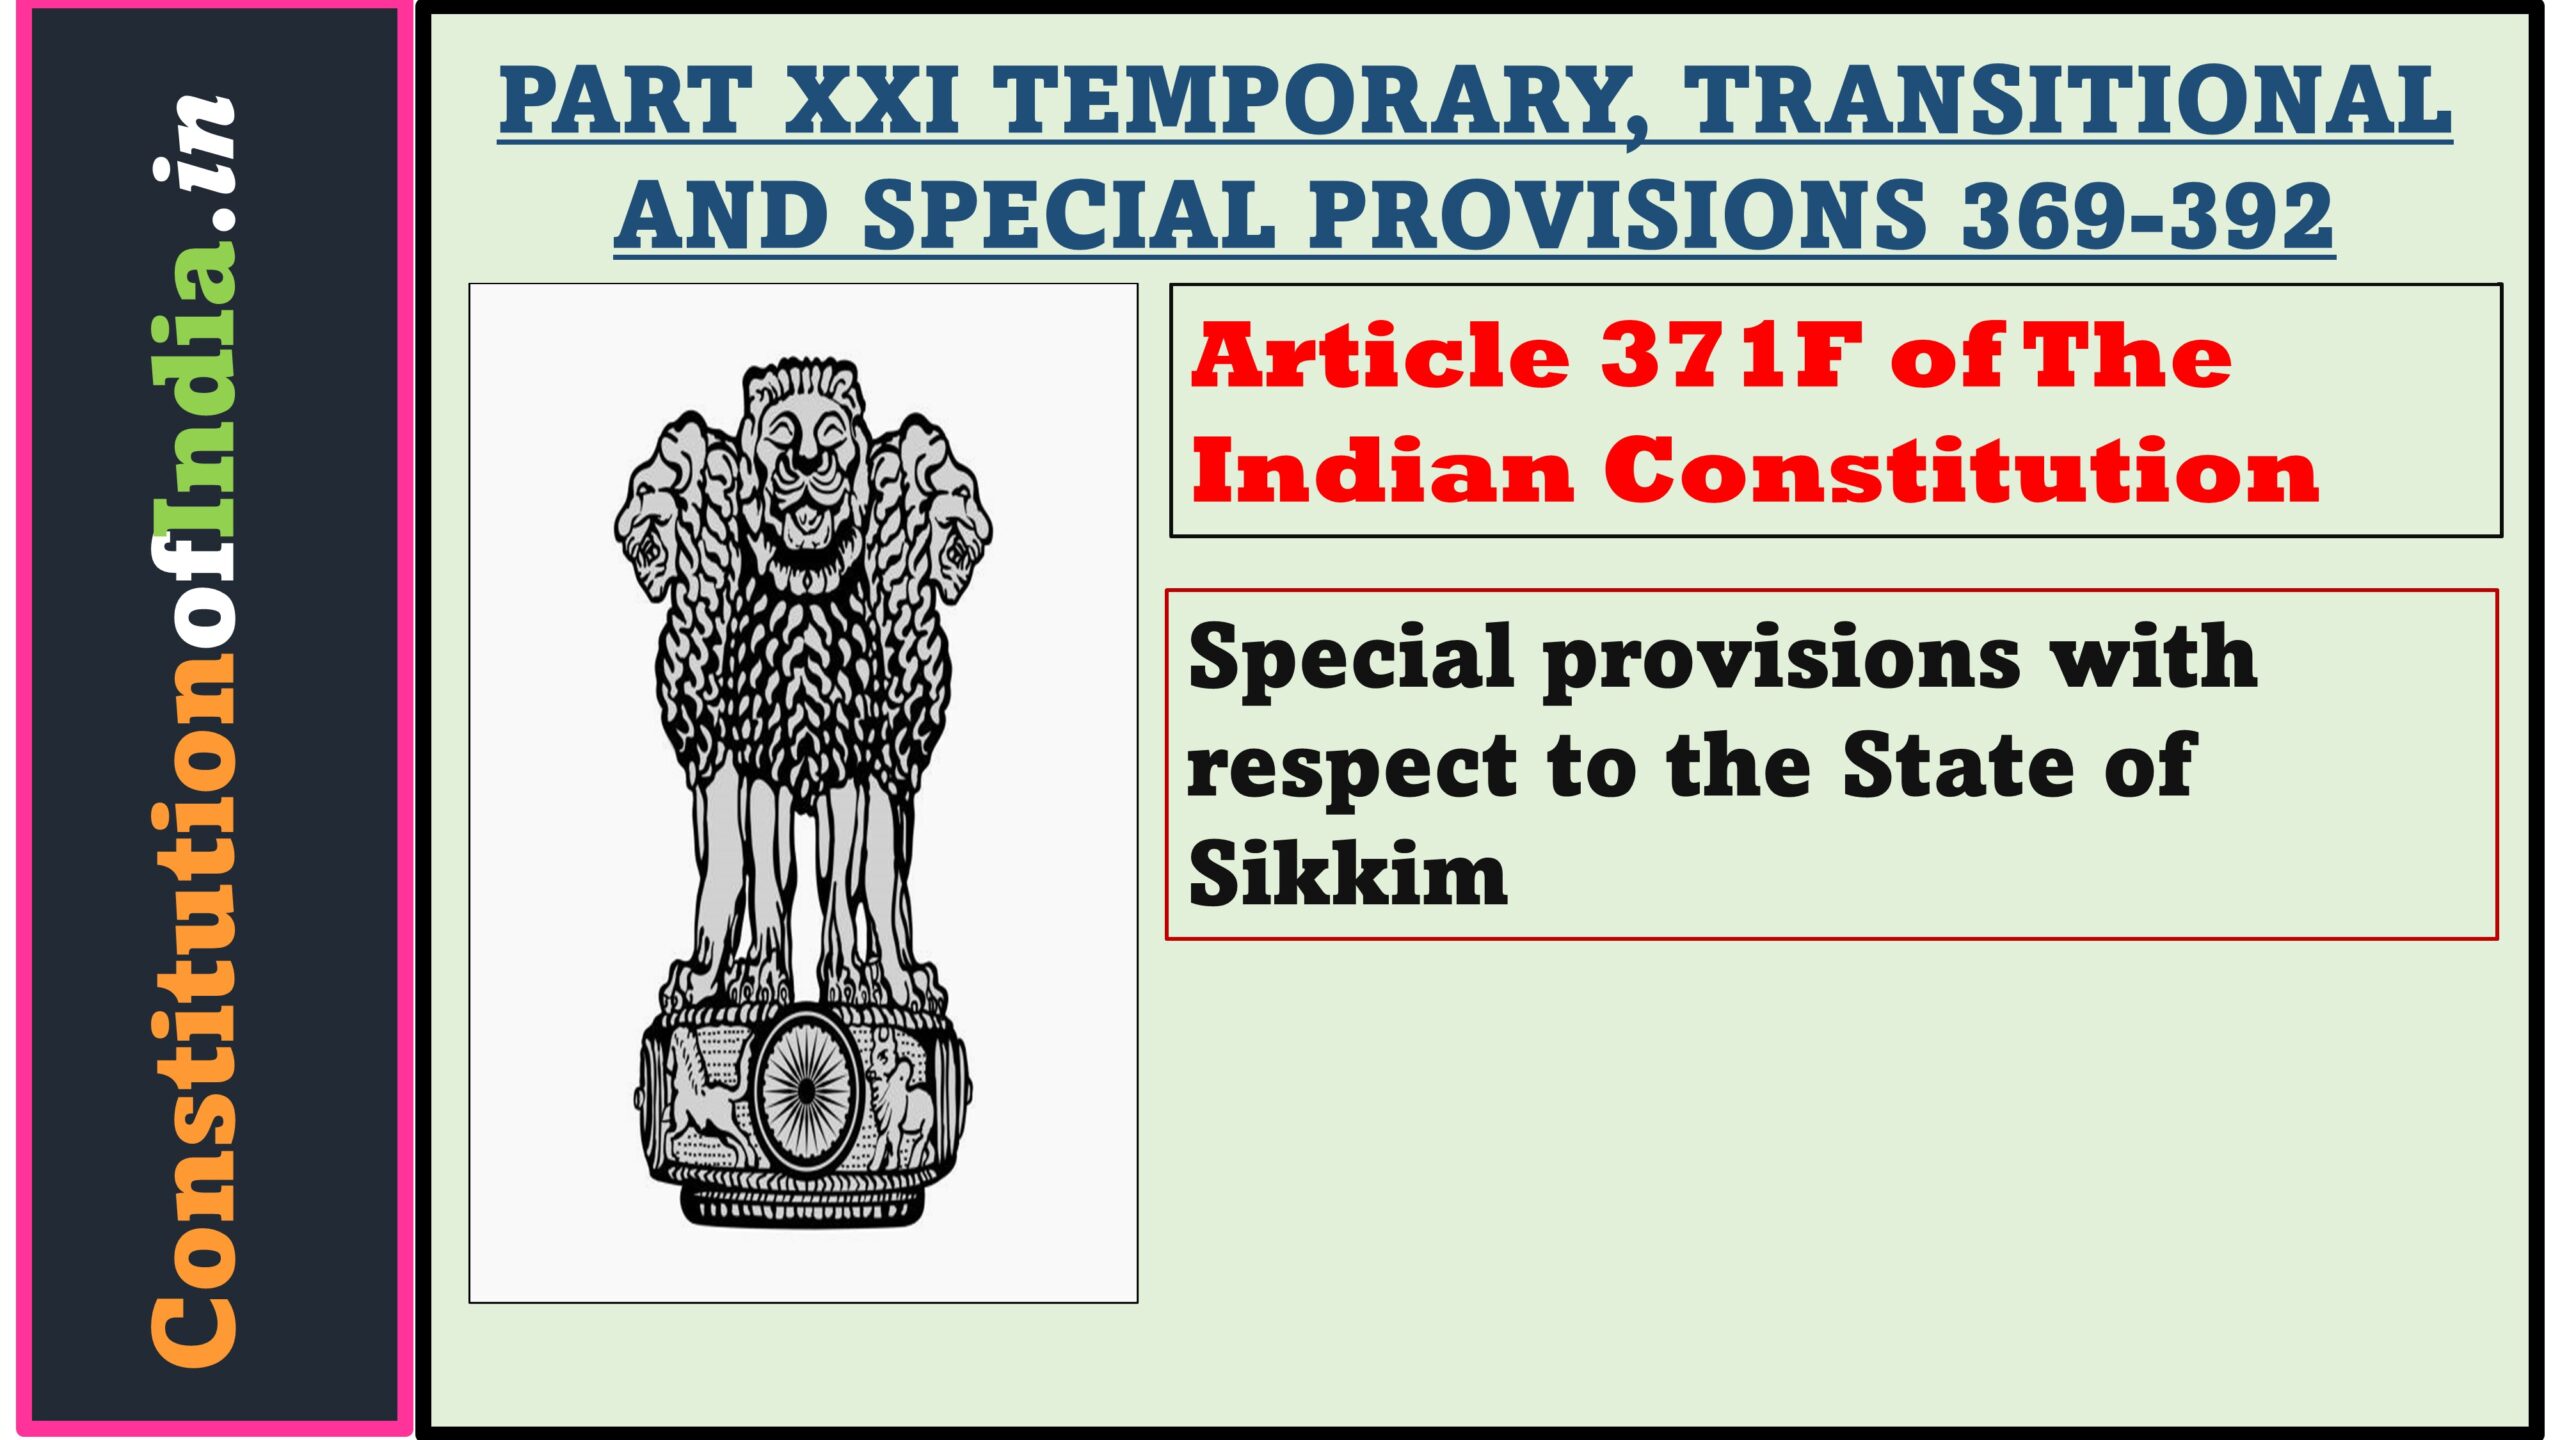 Article 371F of The Indian Constitution